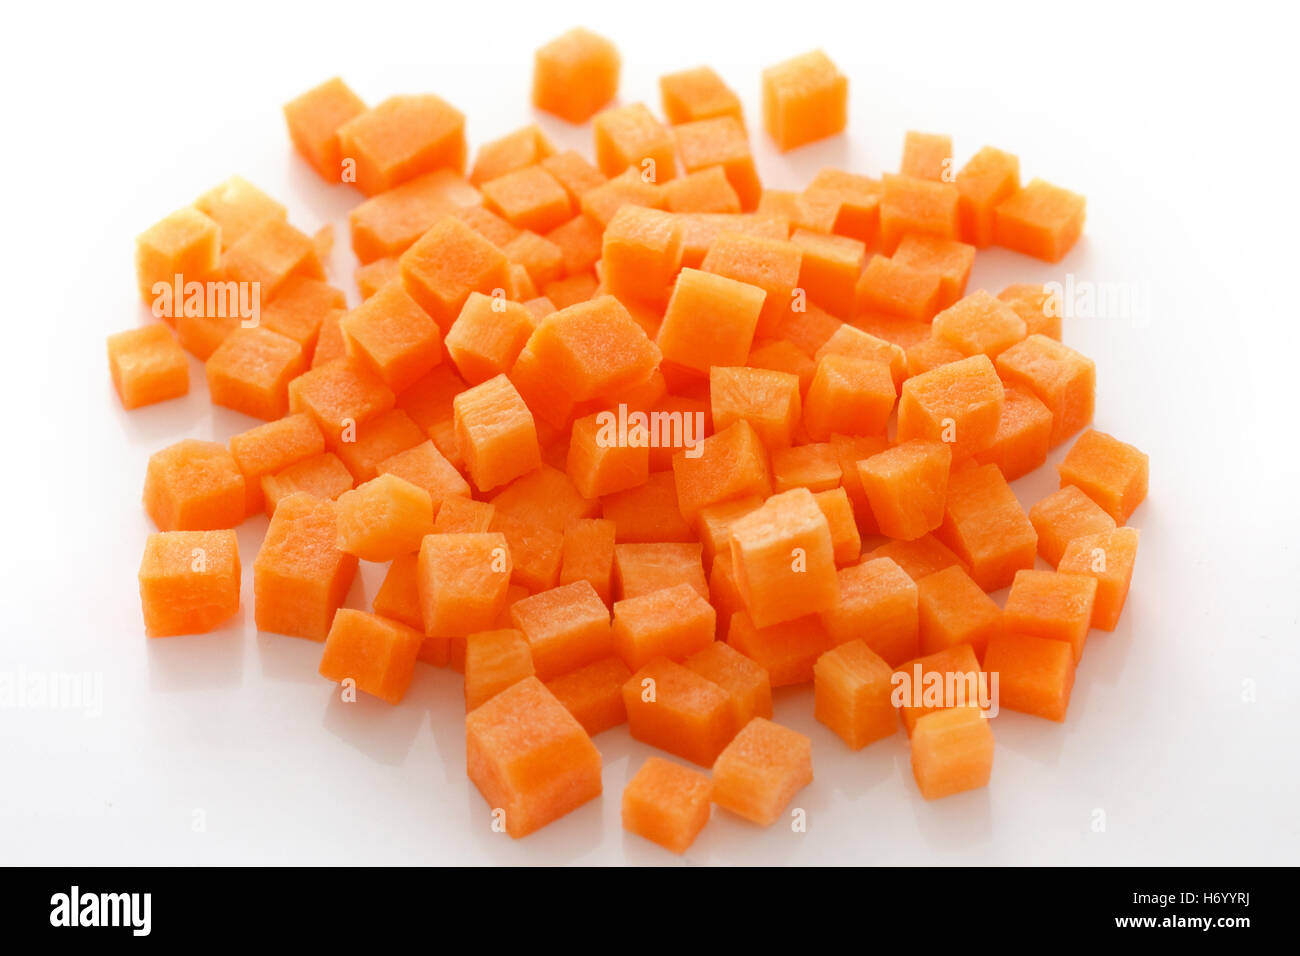 Diced carrots on white Stock Photo